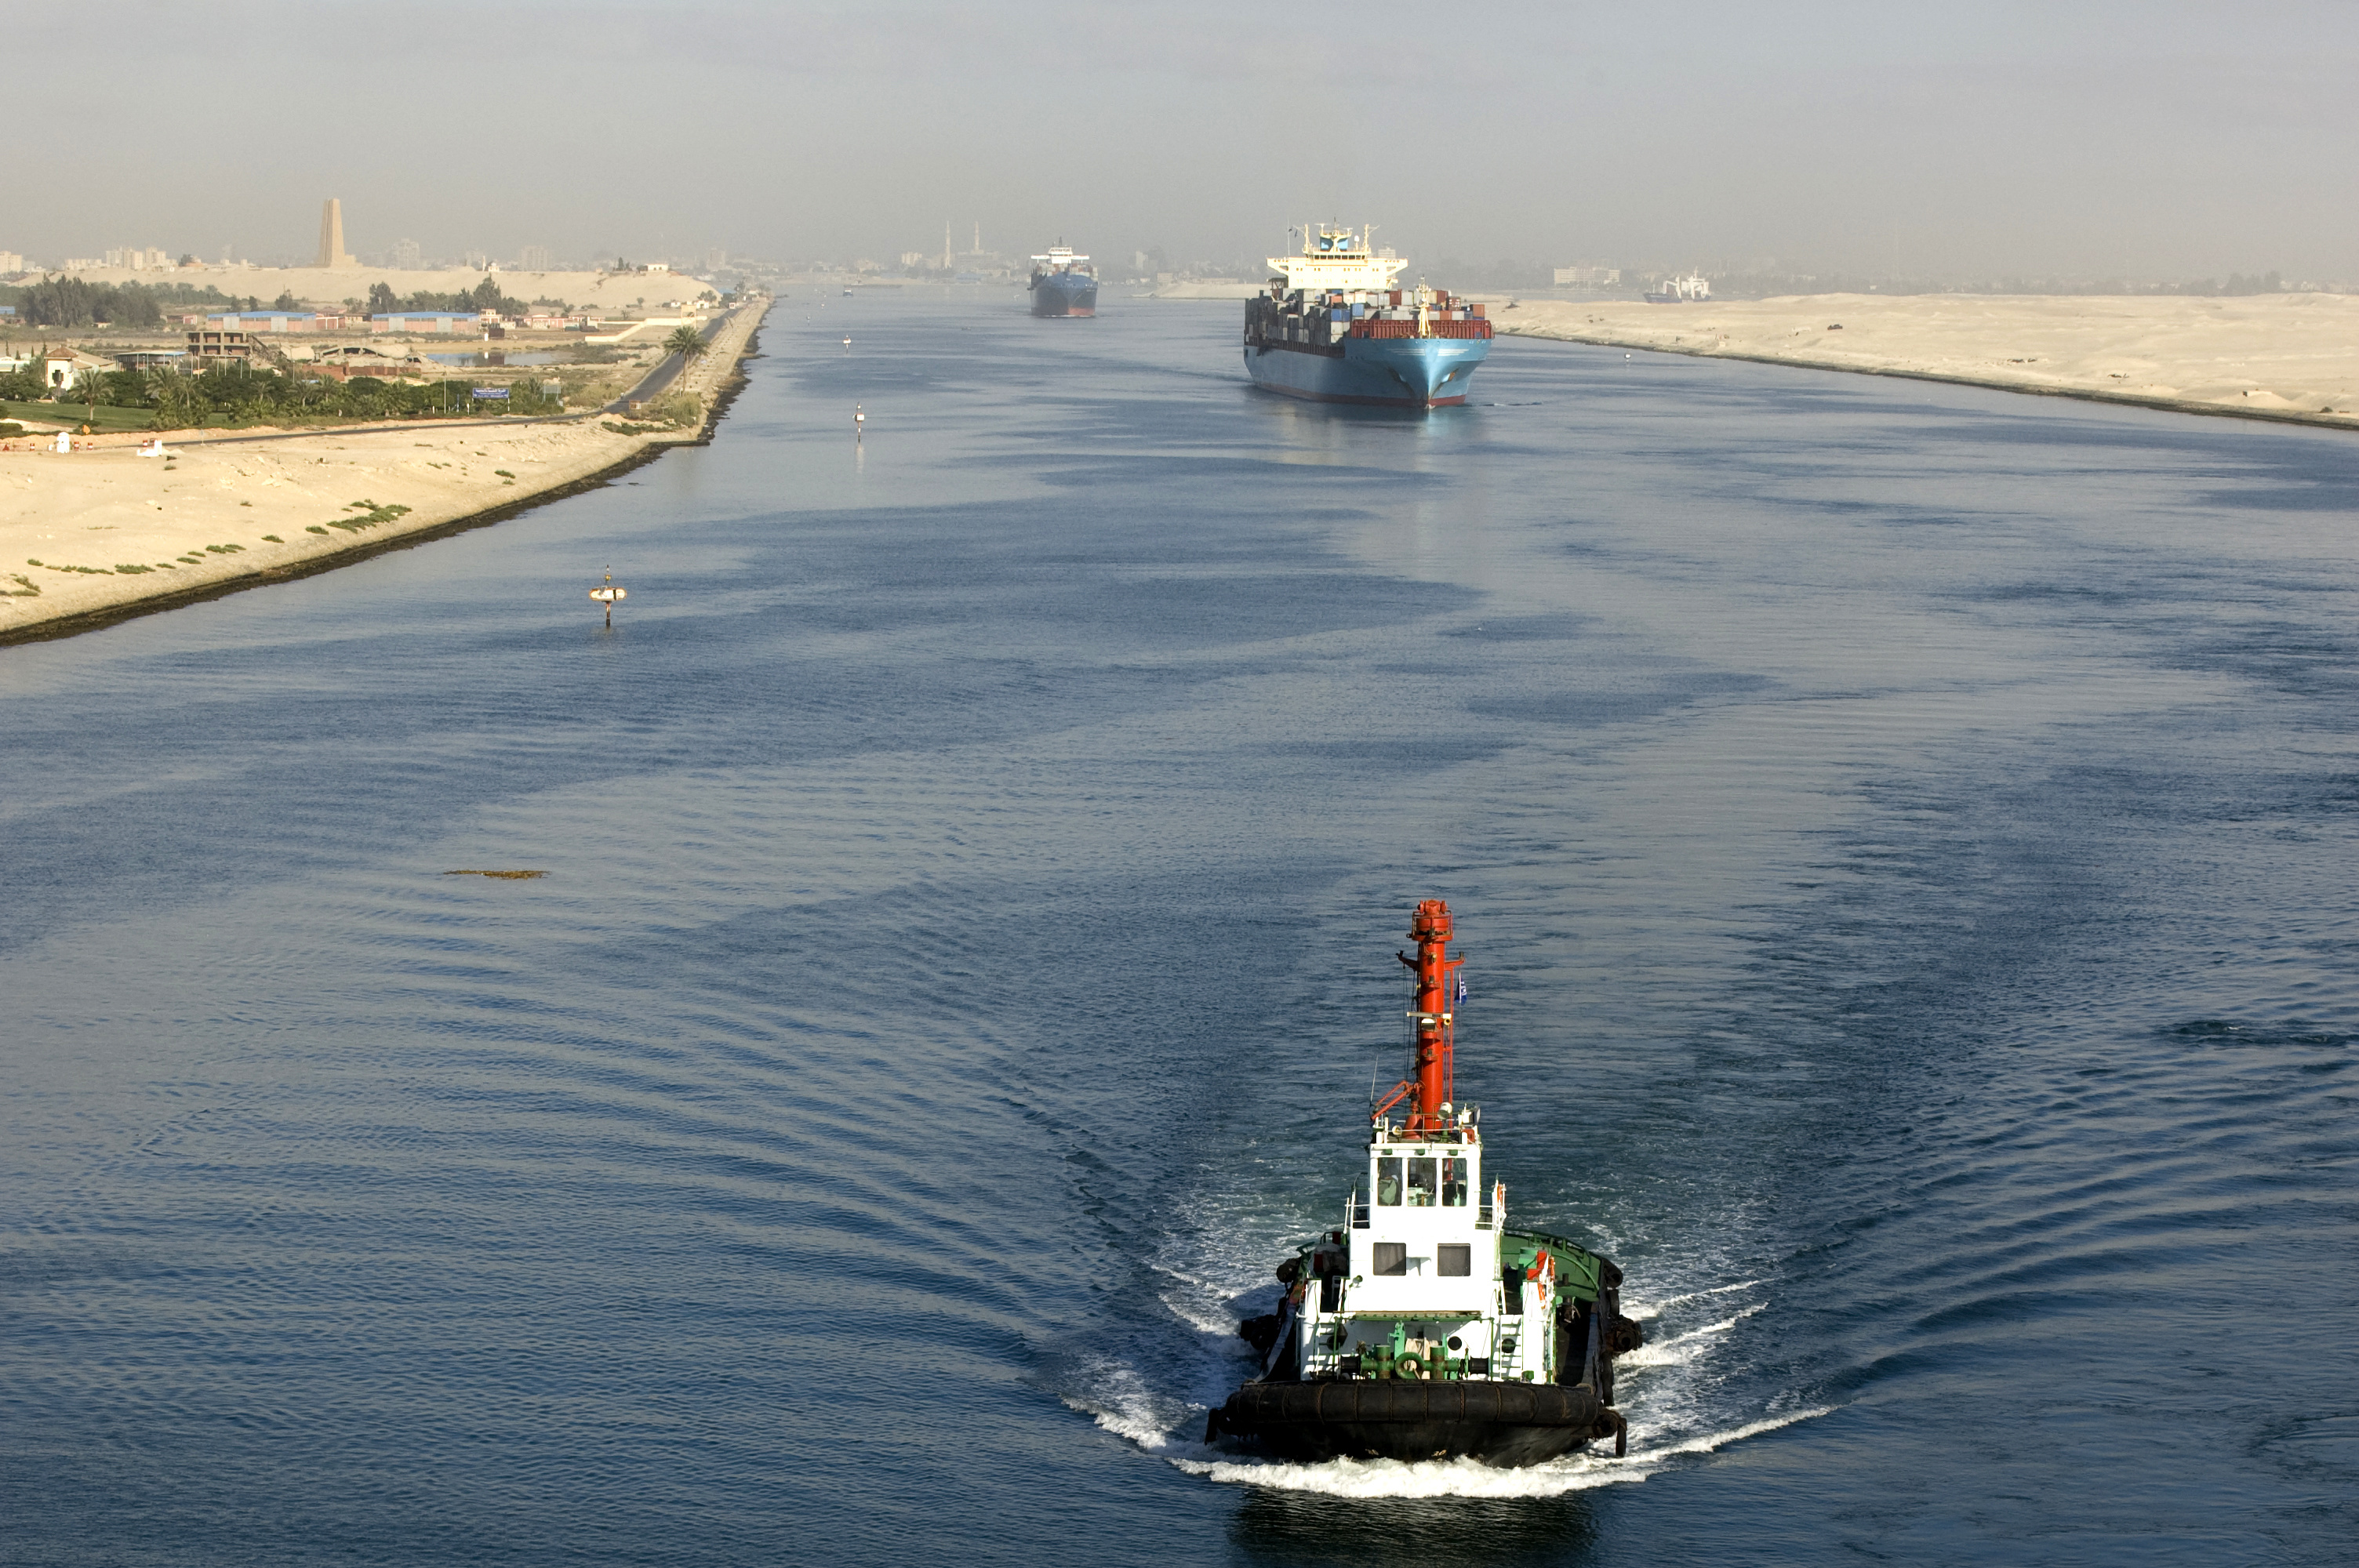 Pilot boat and freighter on the Suez canal